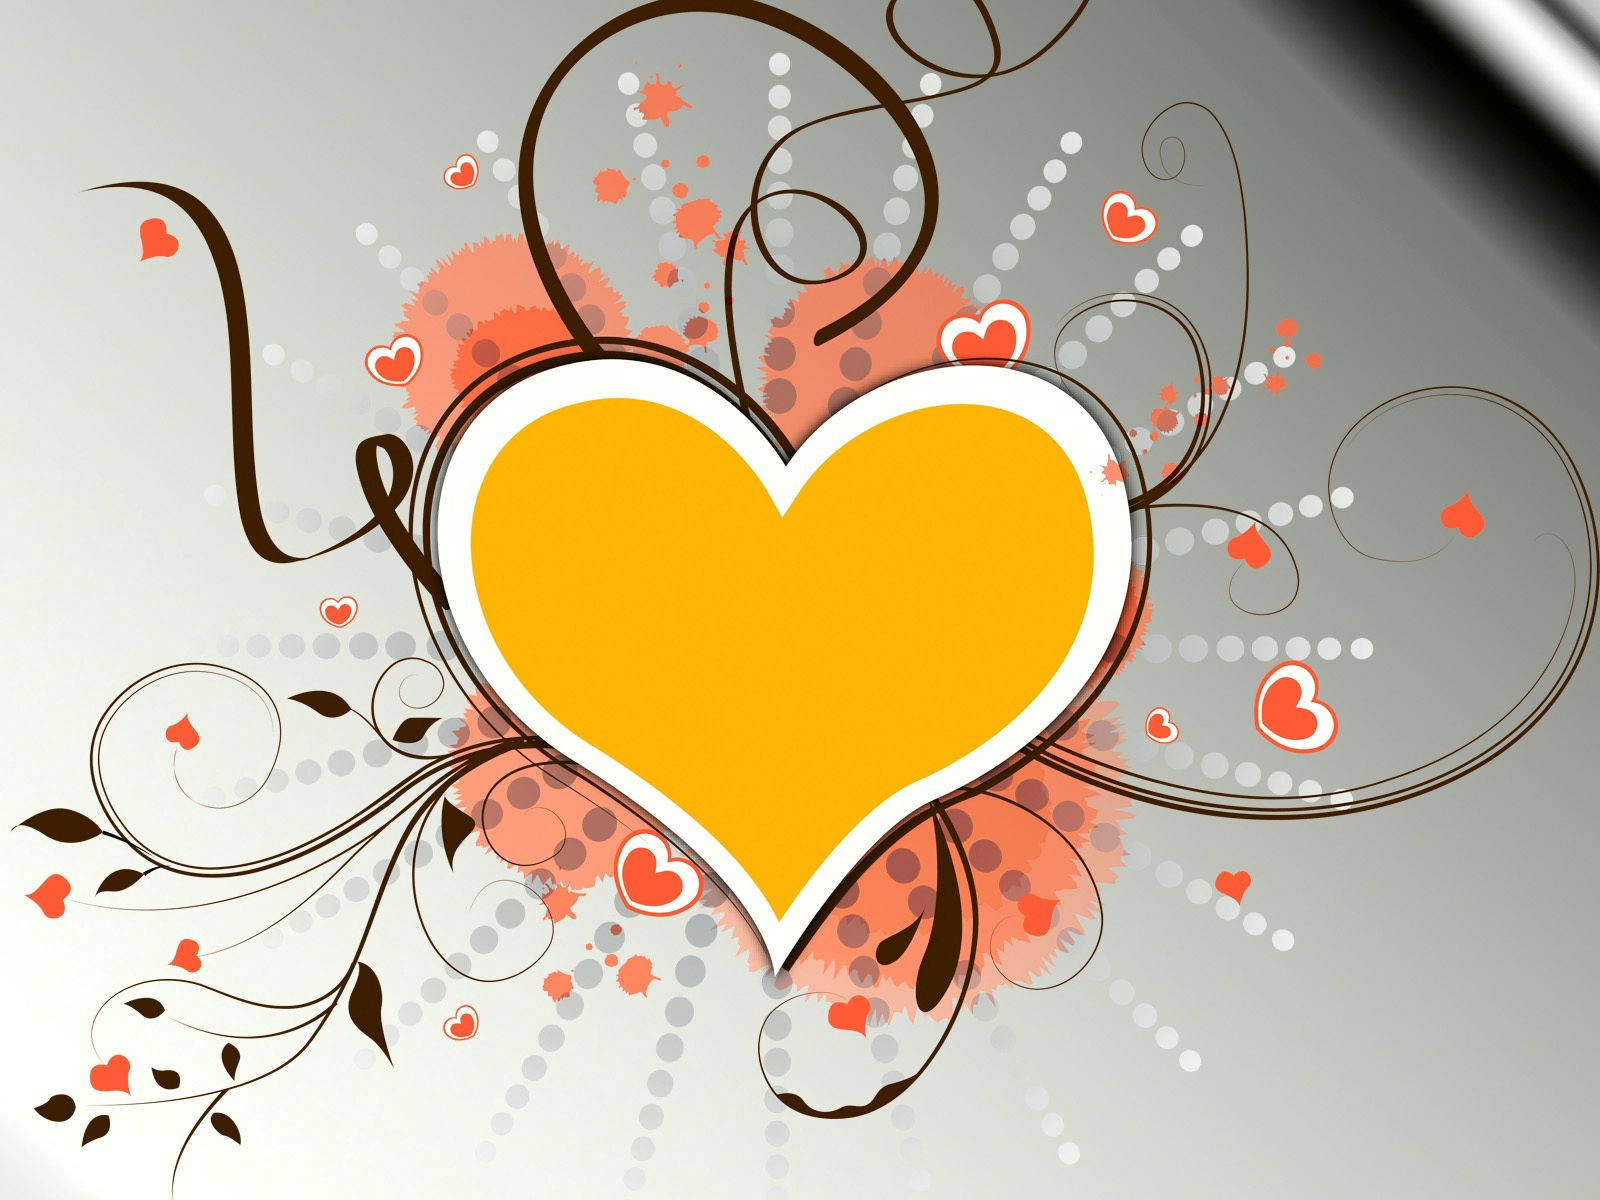 Yellow Heart With Fancy Art Design Background